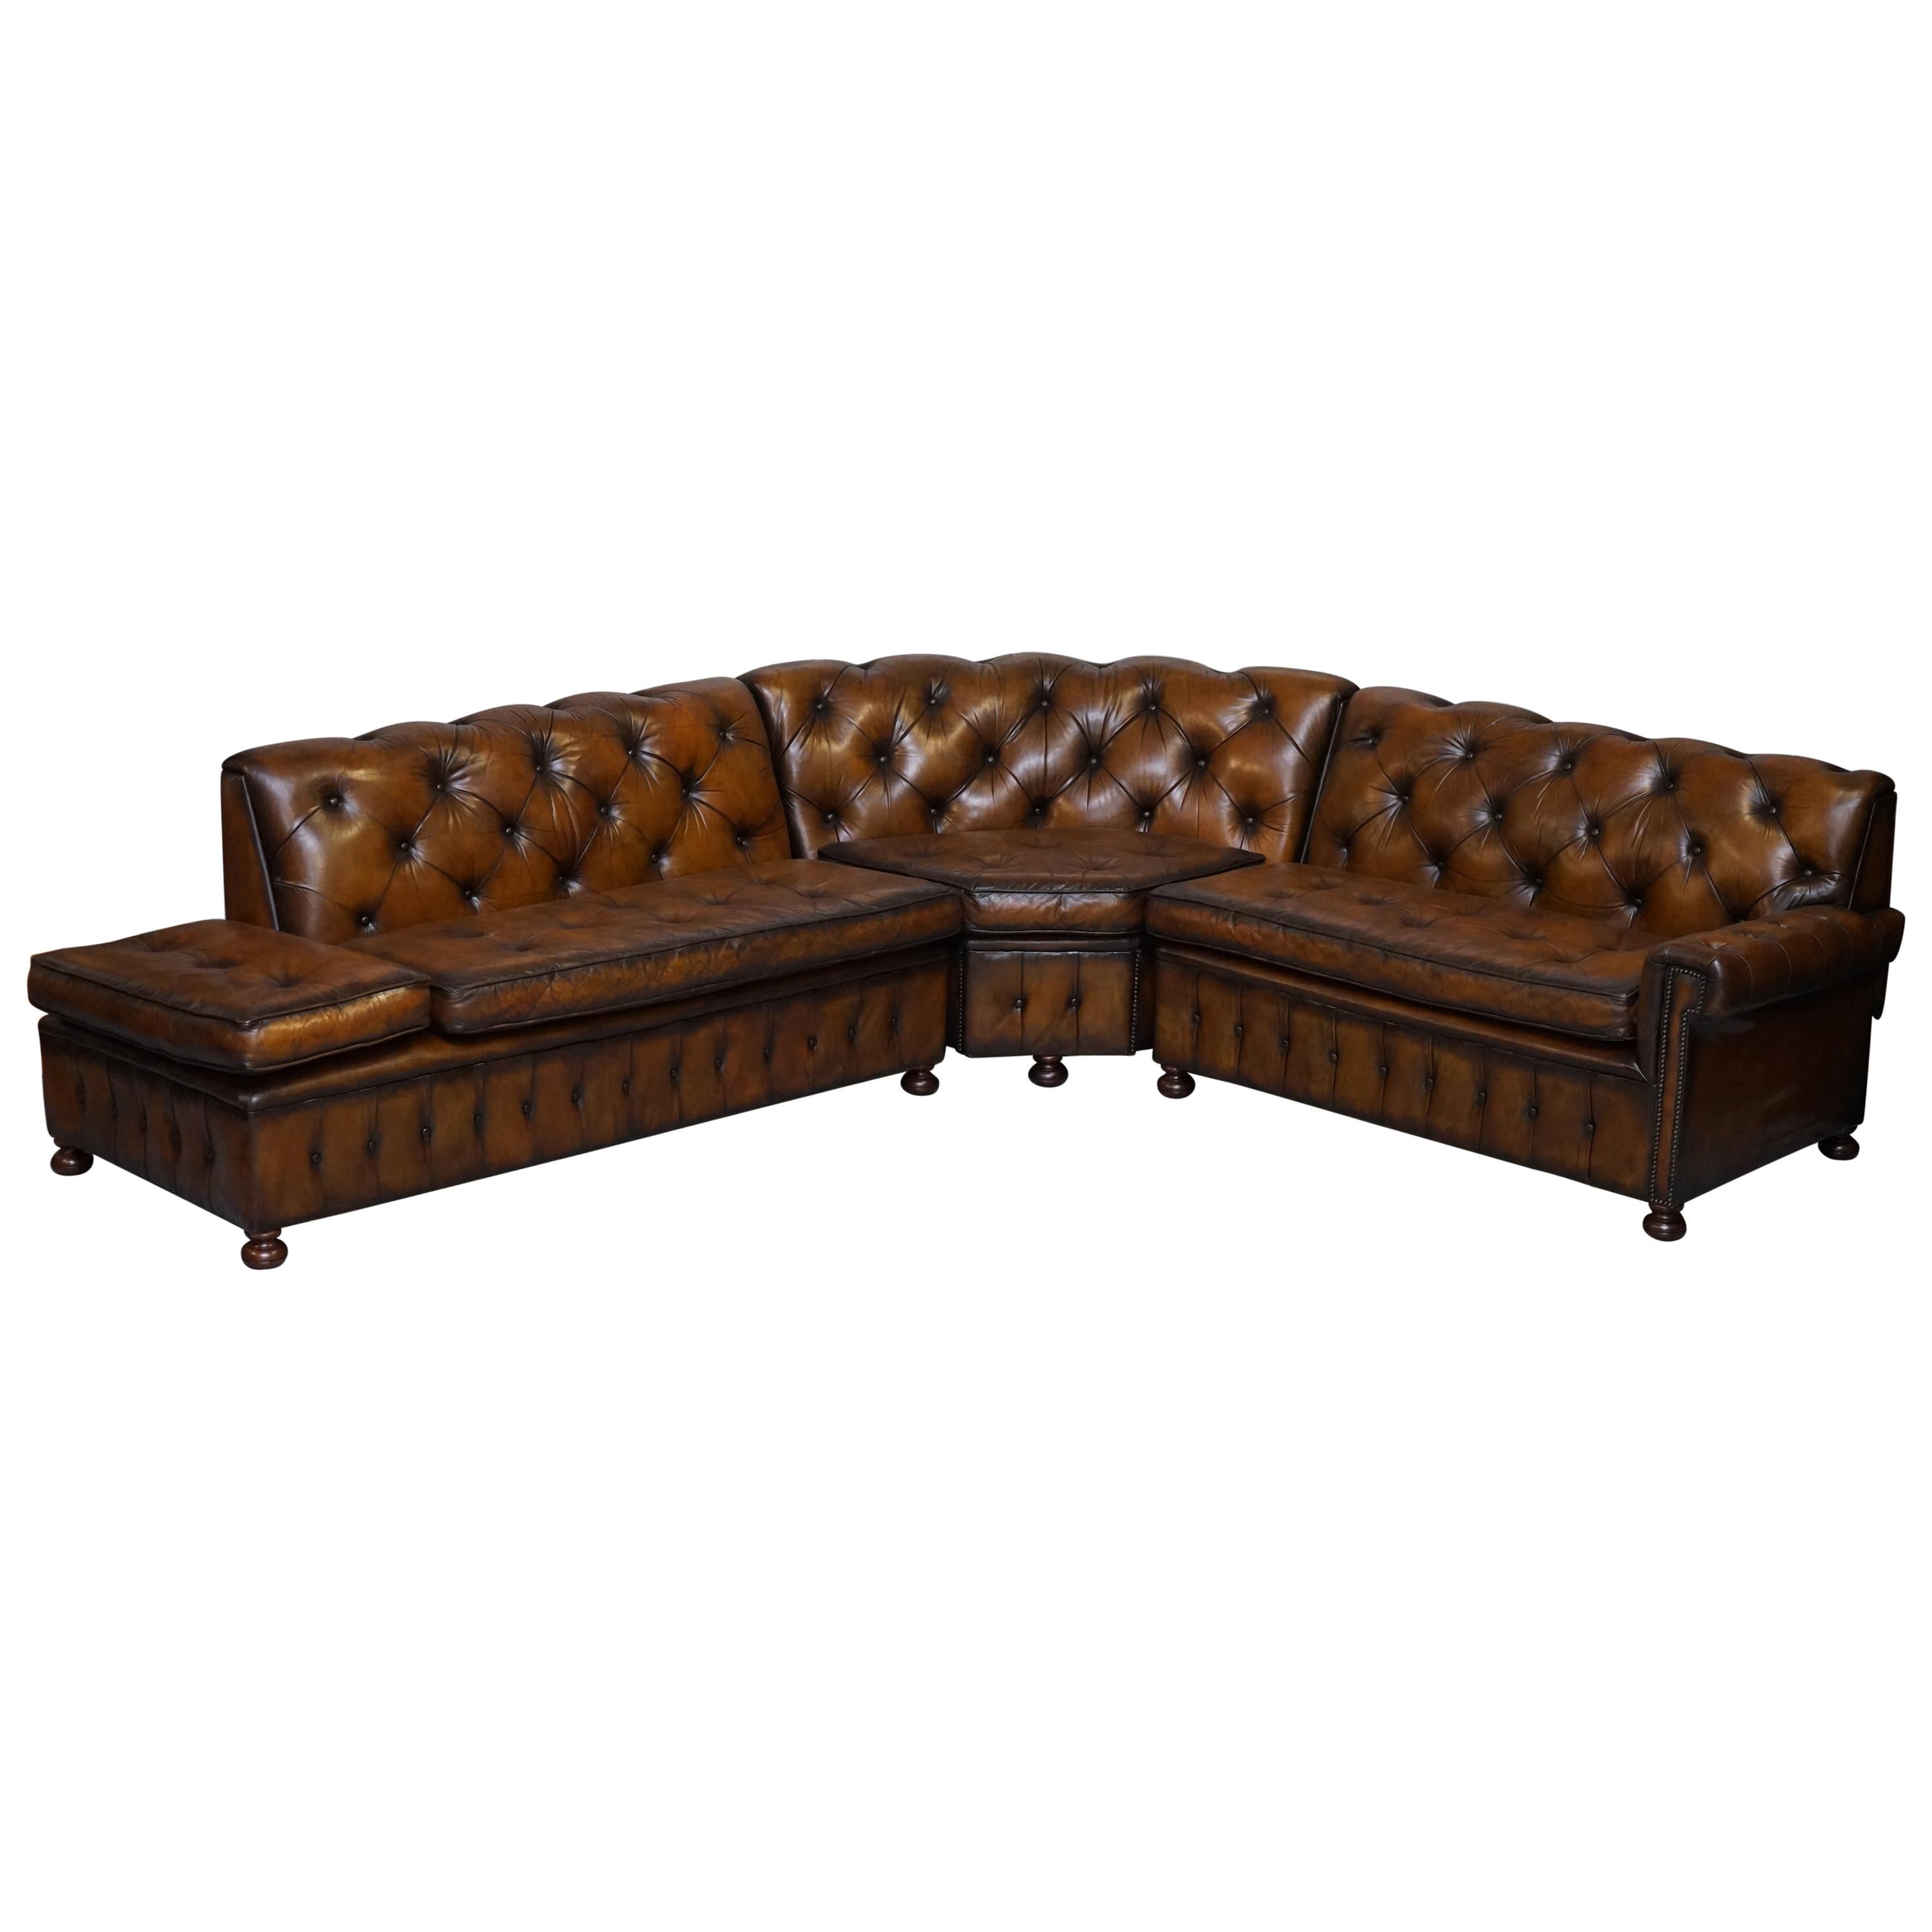 Vintage Harrods Chesterfield Hand Dyed Cigar Brown Leather Corner Sofa Walnut For Sale